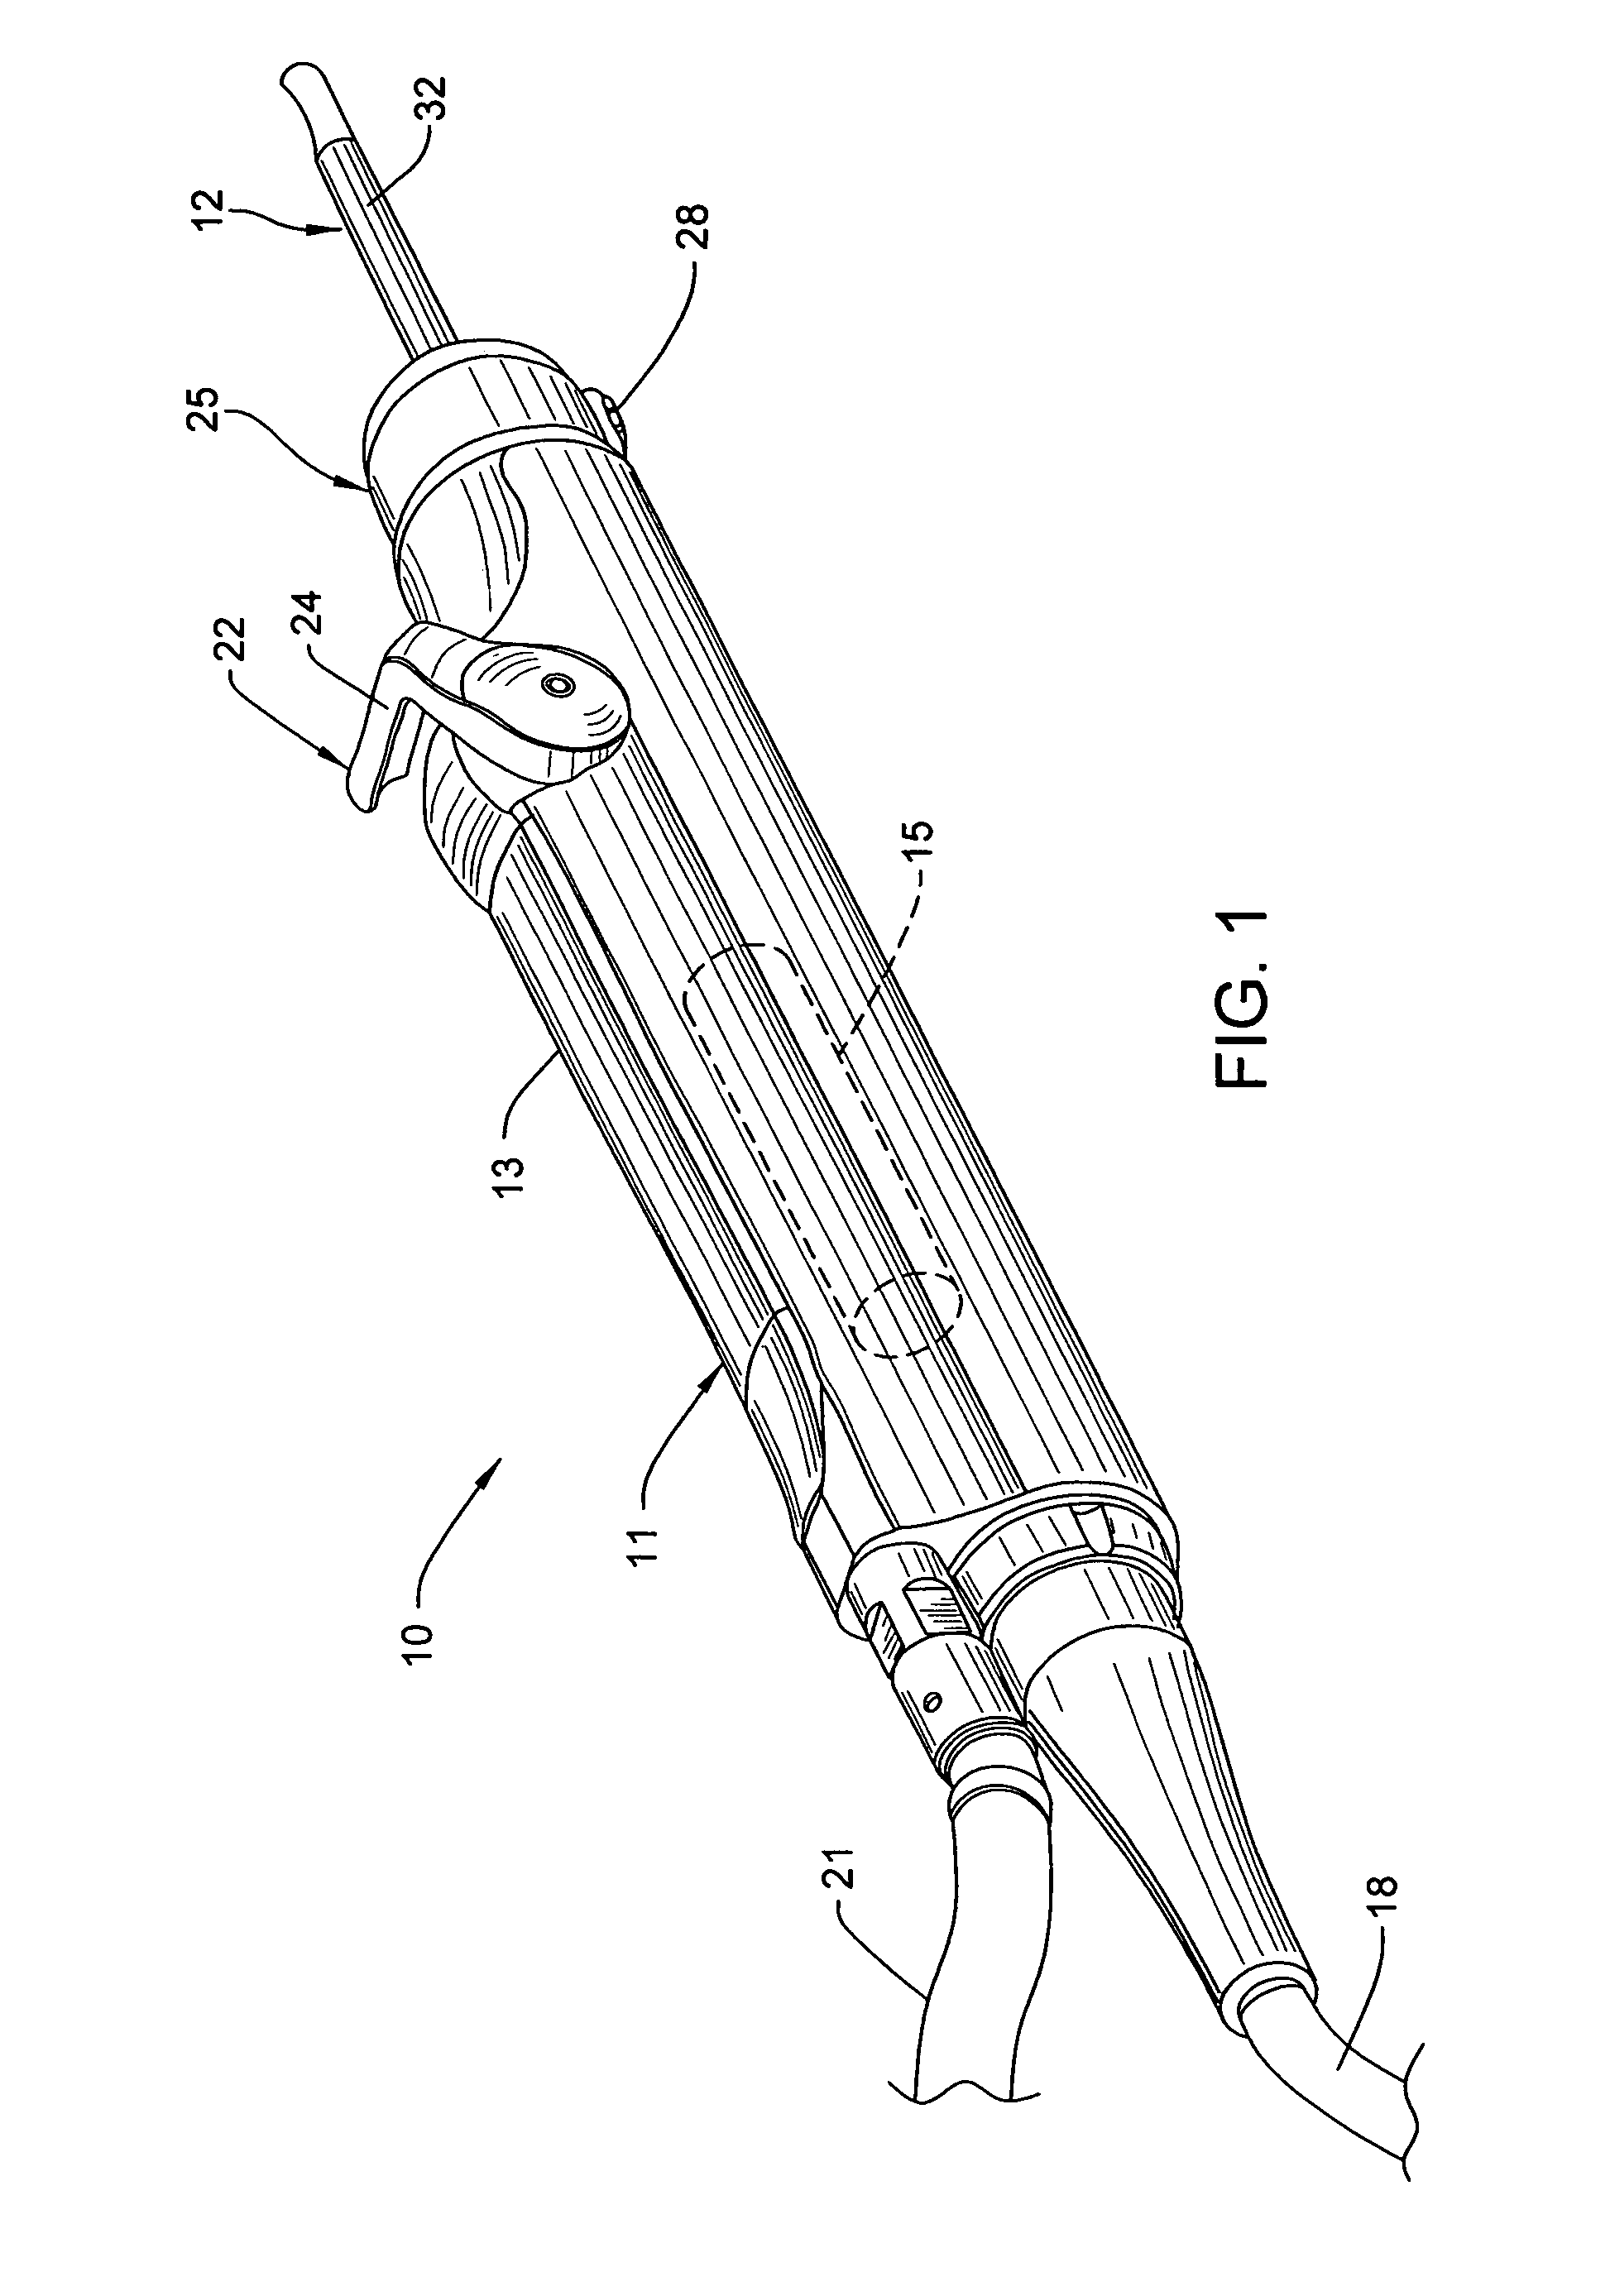 Surgical tool arrangement and surgical cutting accessory for use therewith with the tool arrangement including a toothed cutting edge and a generally straight cutting edge